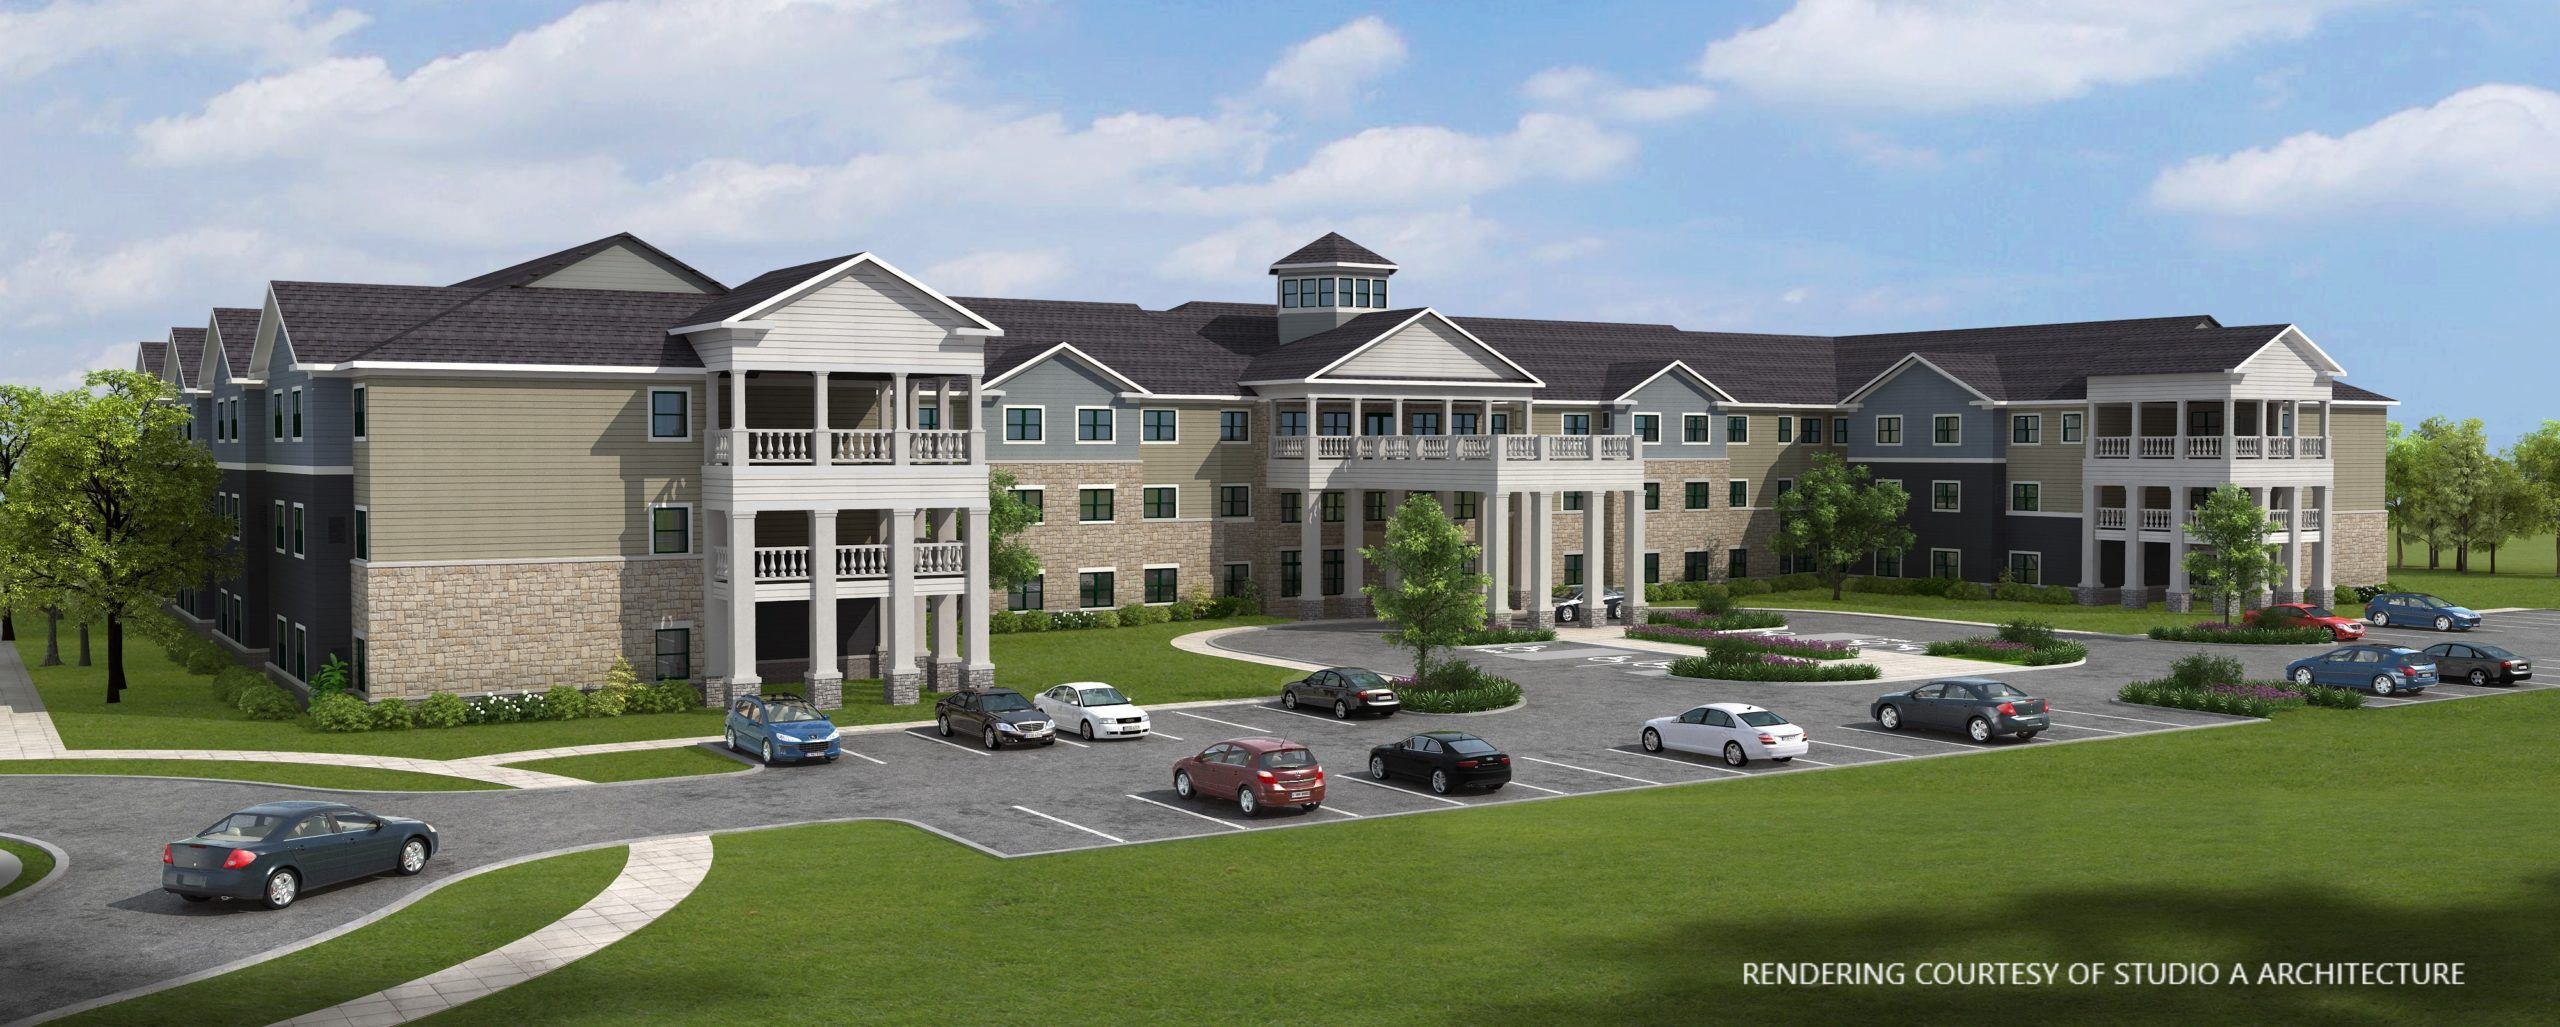 A rendering of the Avalon apartment complex